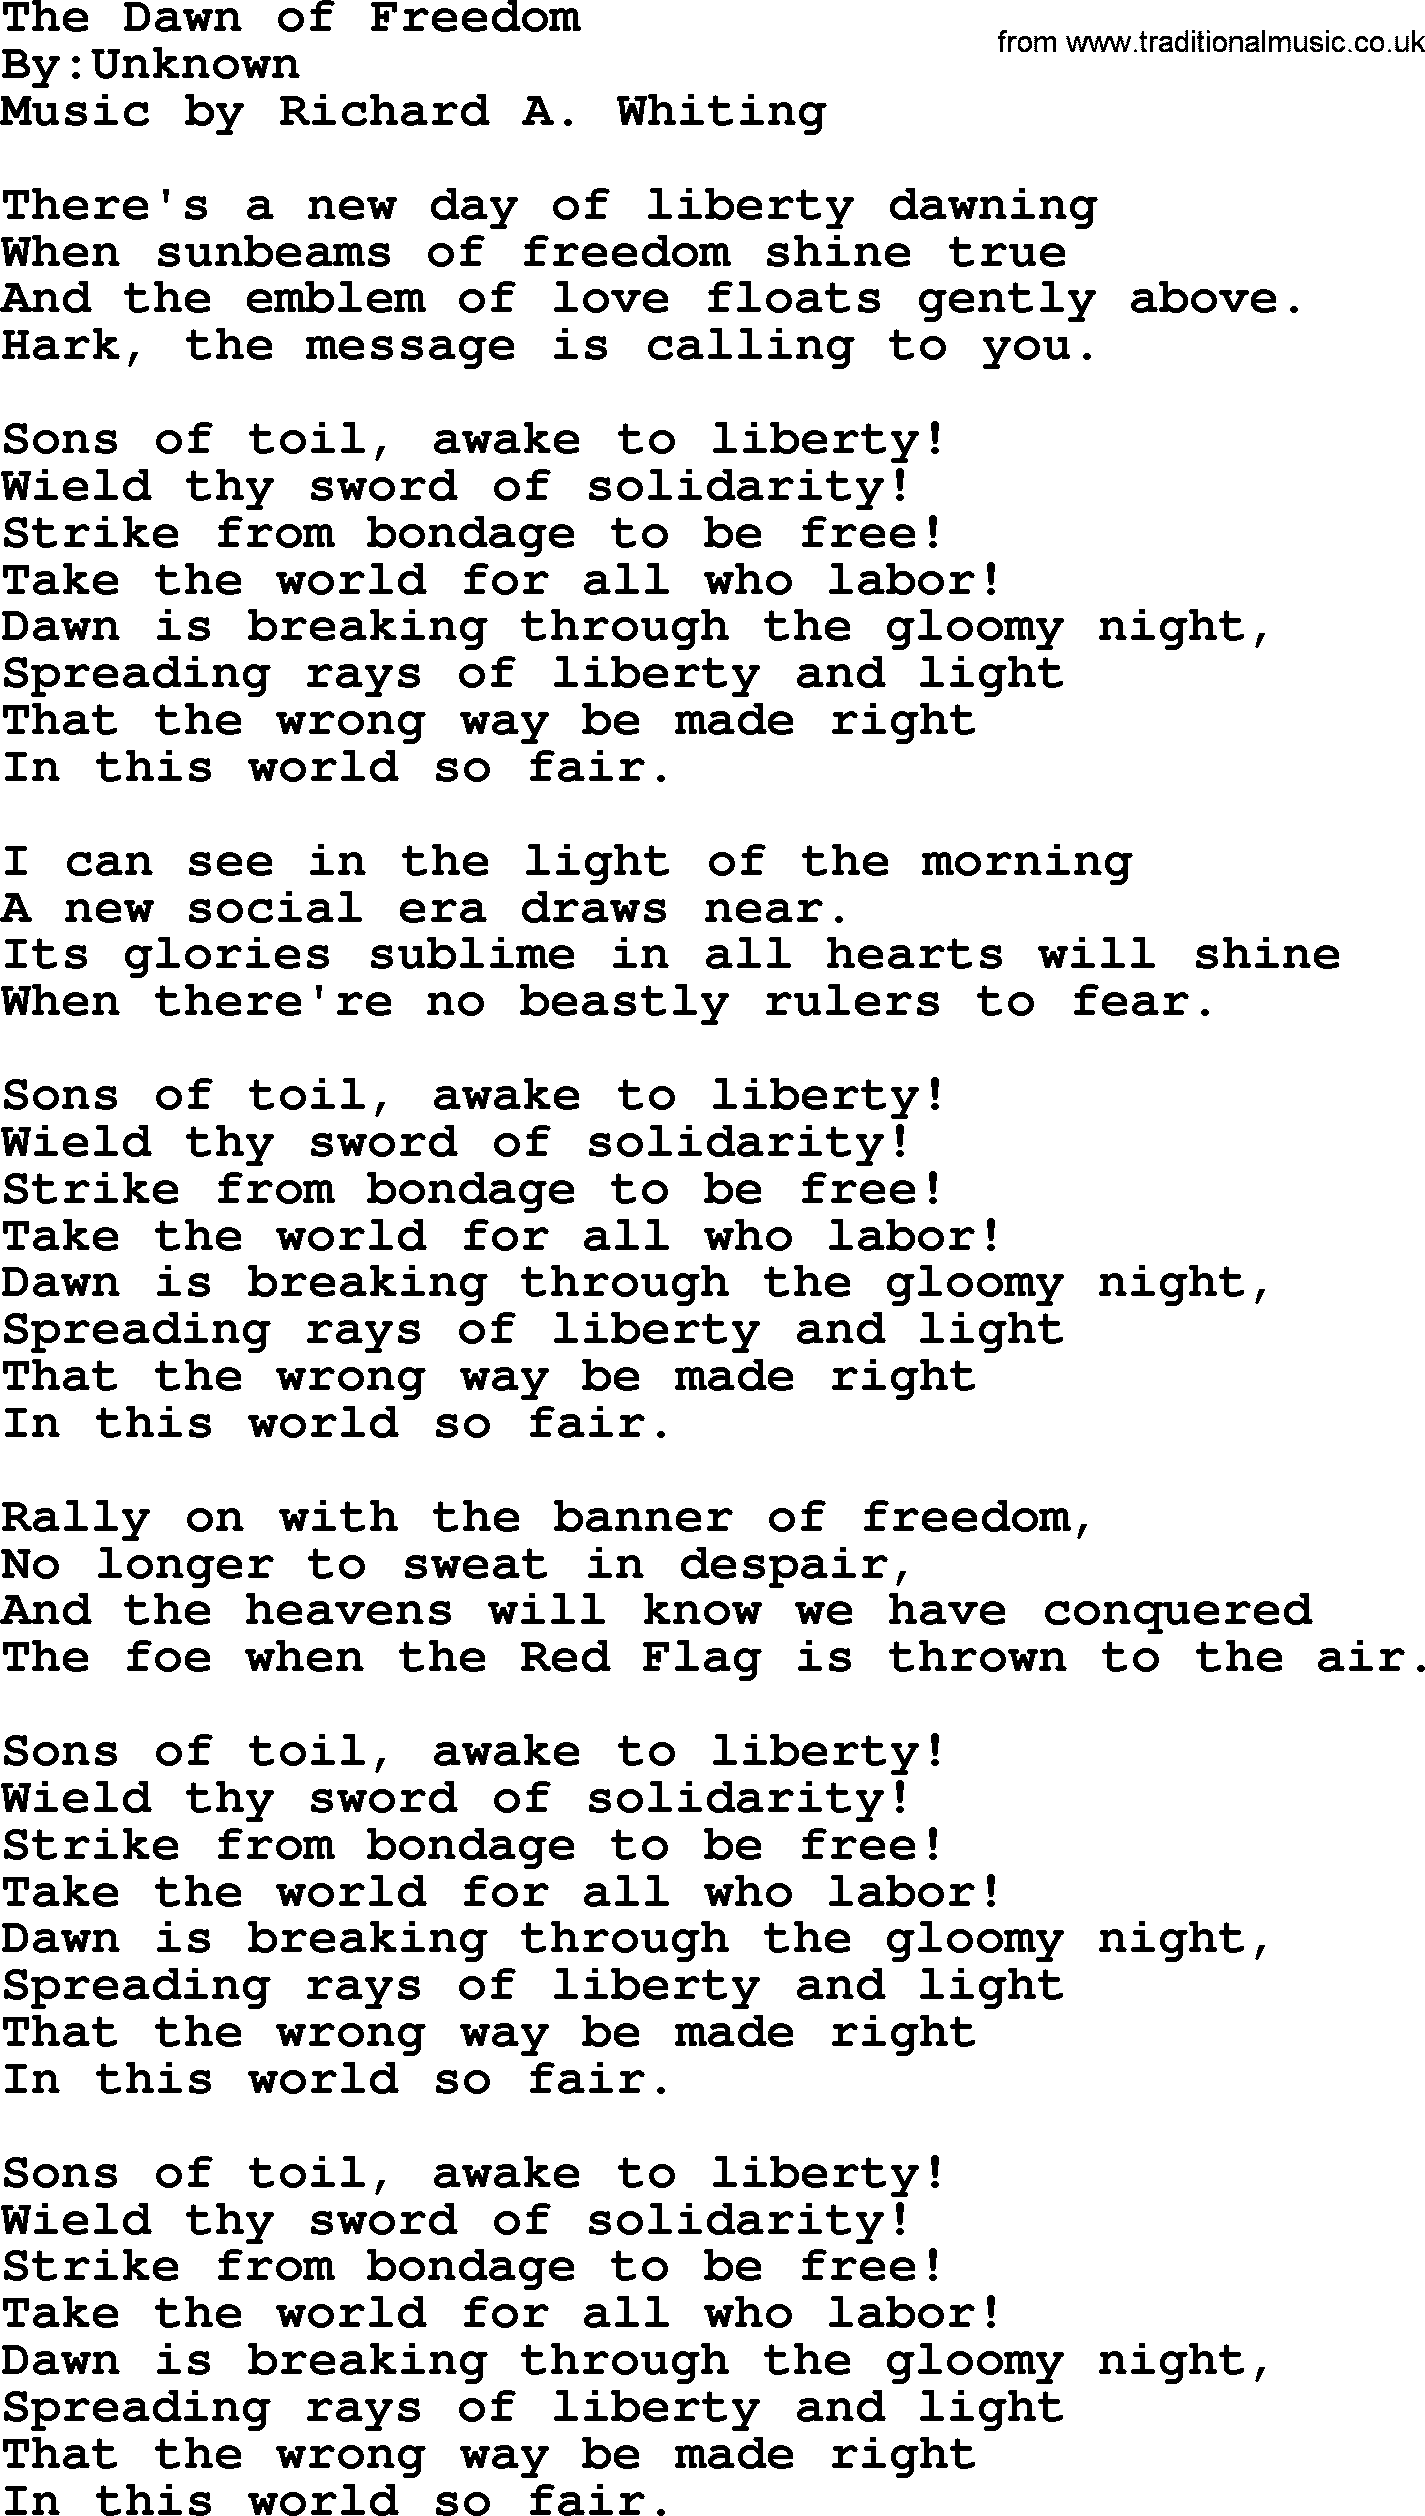 Political, Solidarity, Workers or Union song: The Dawn Of Freedom, lyrics